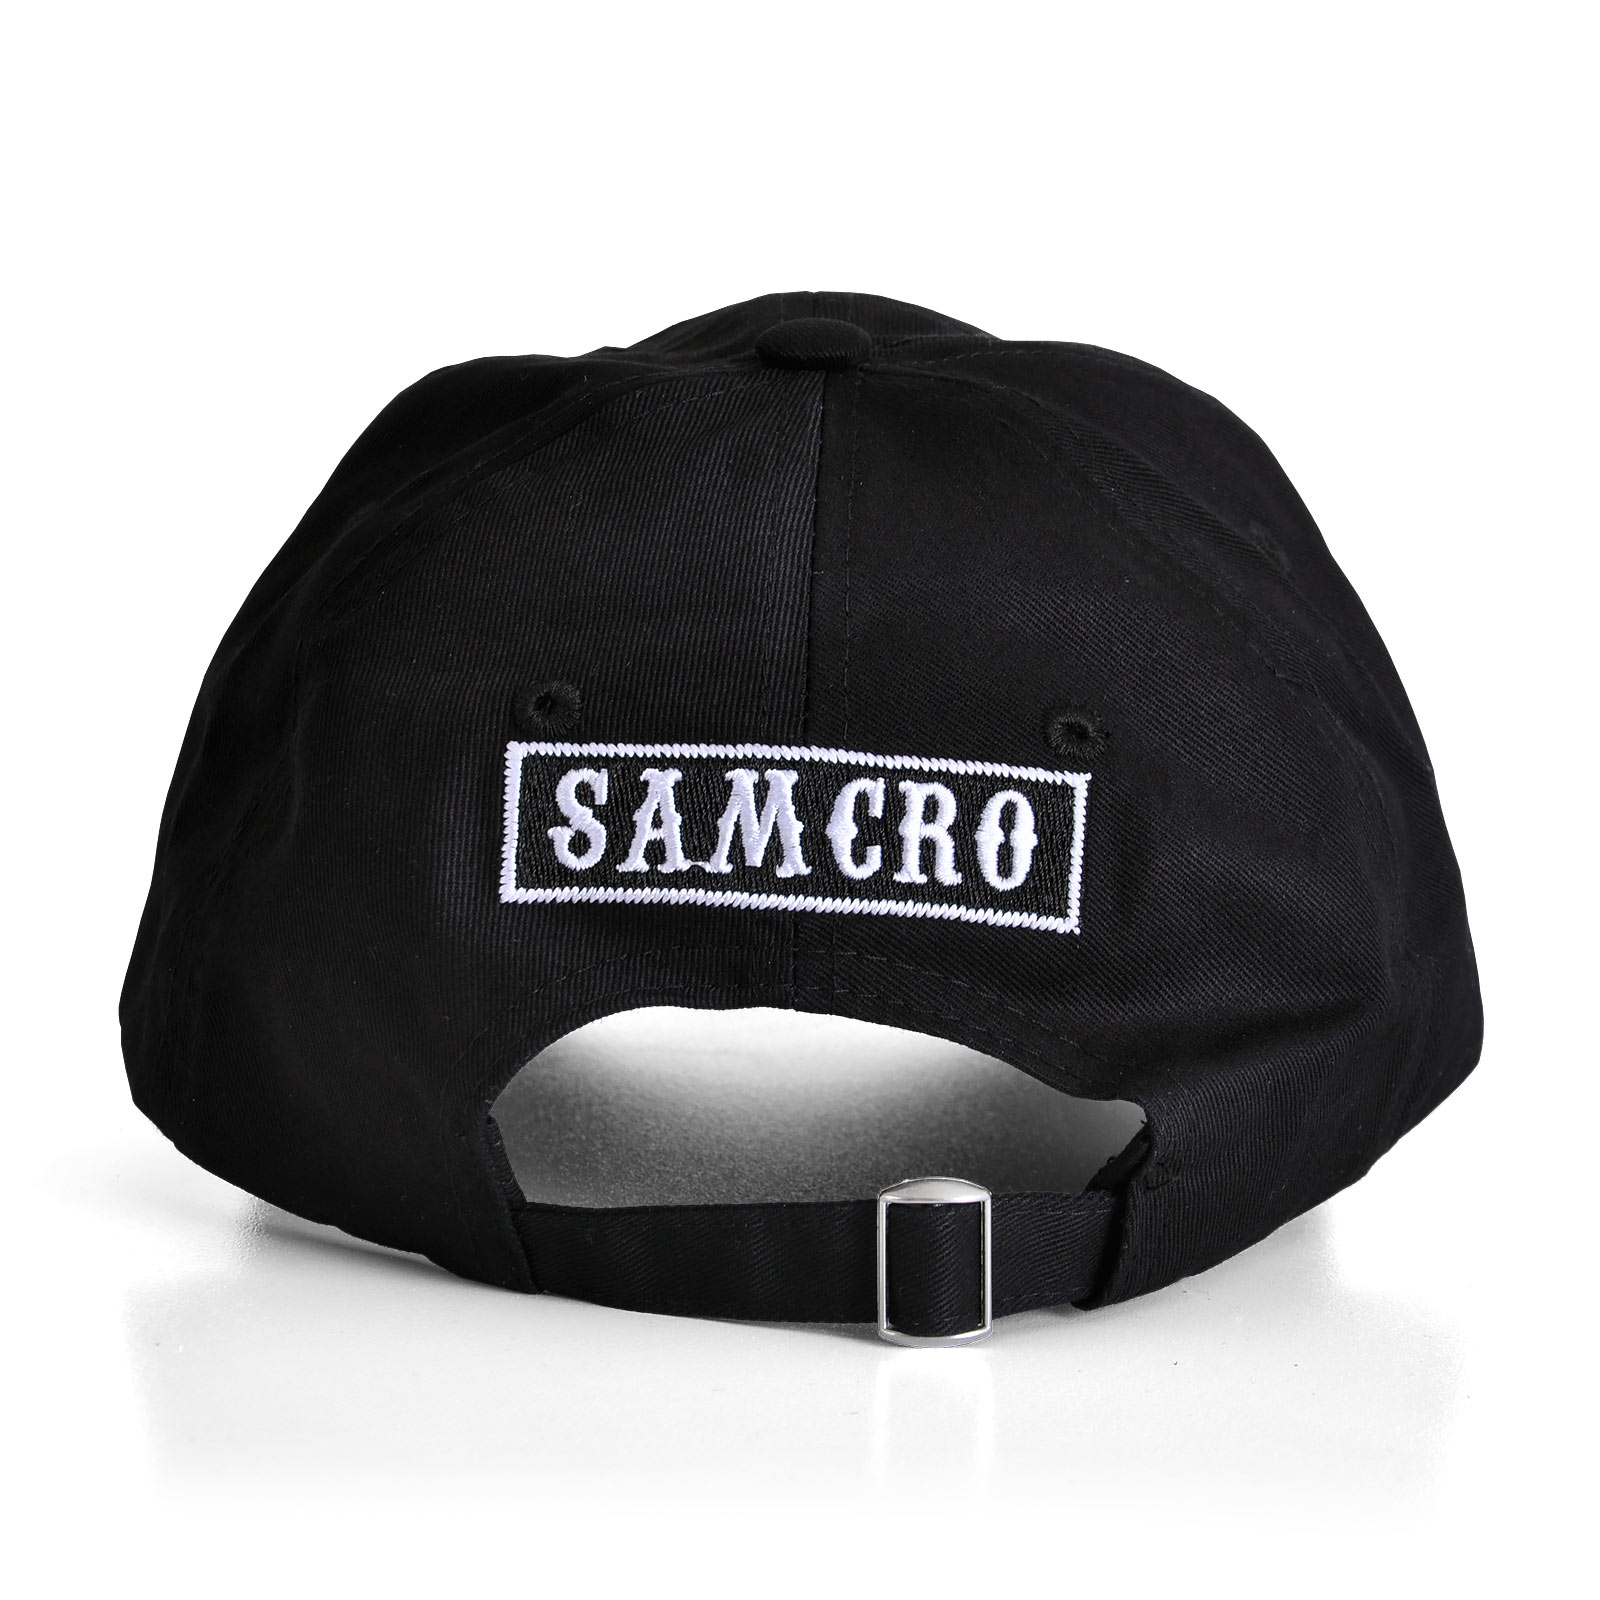 Sons Of Anarchy - Reaper Logo Cap